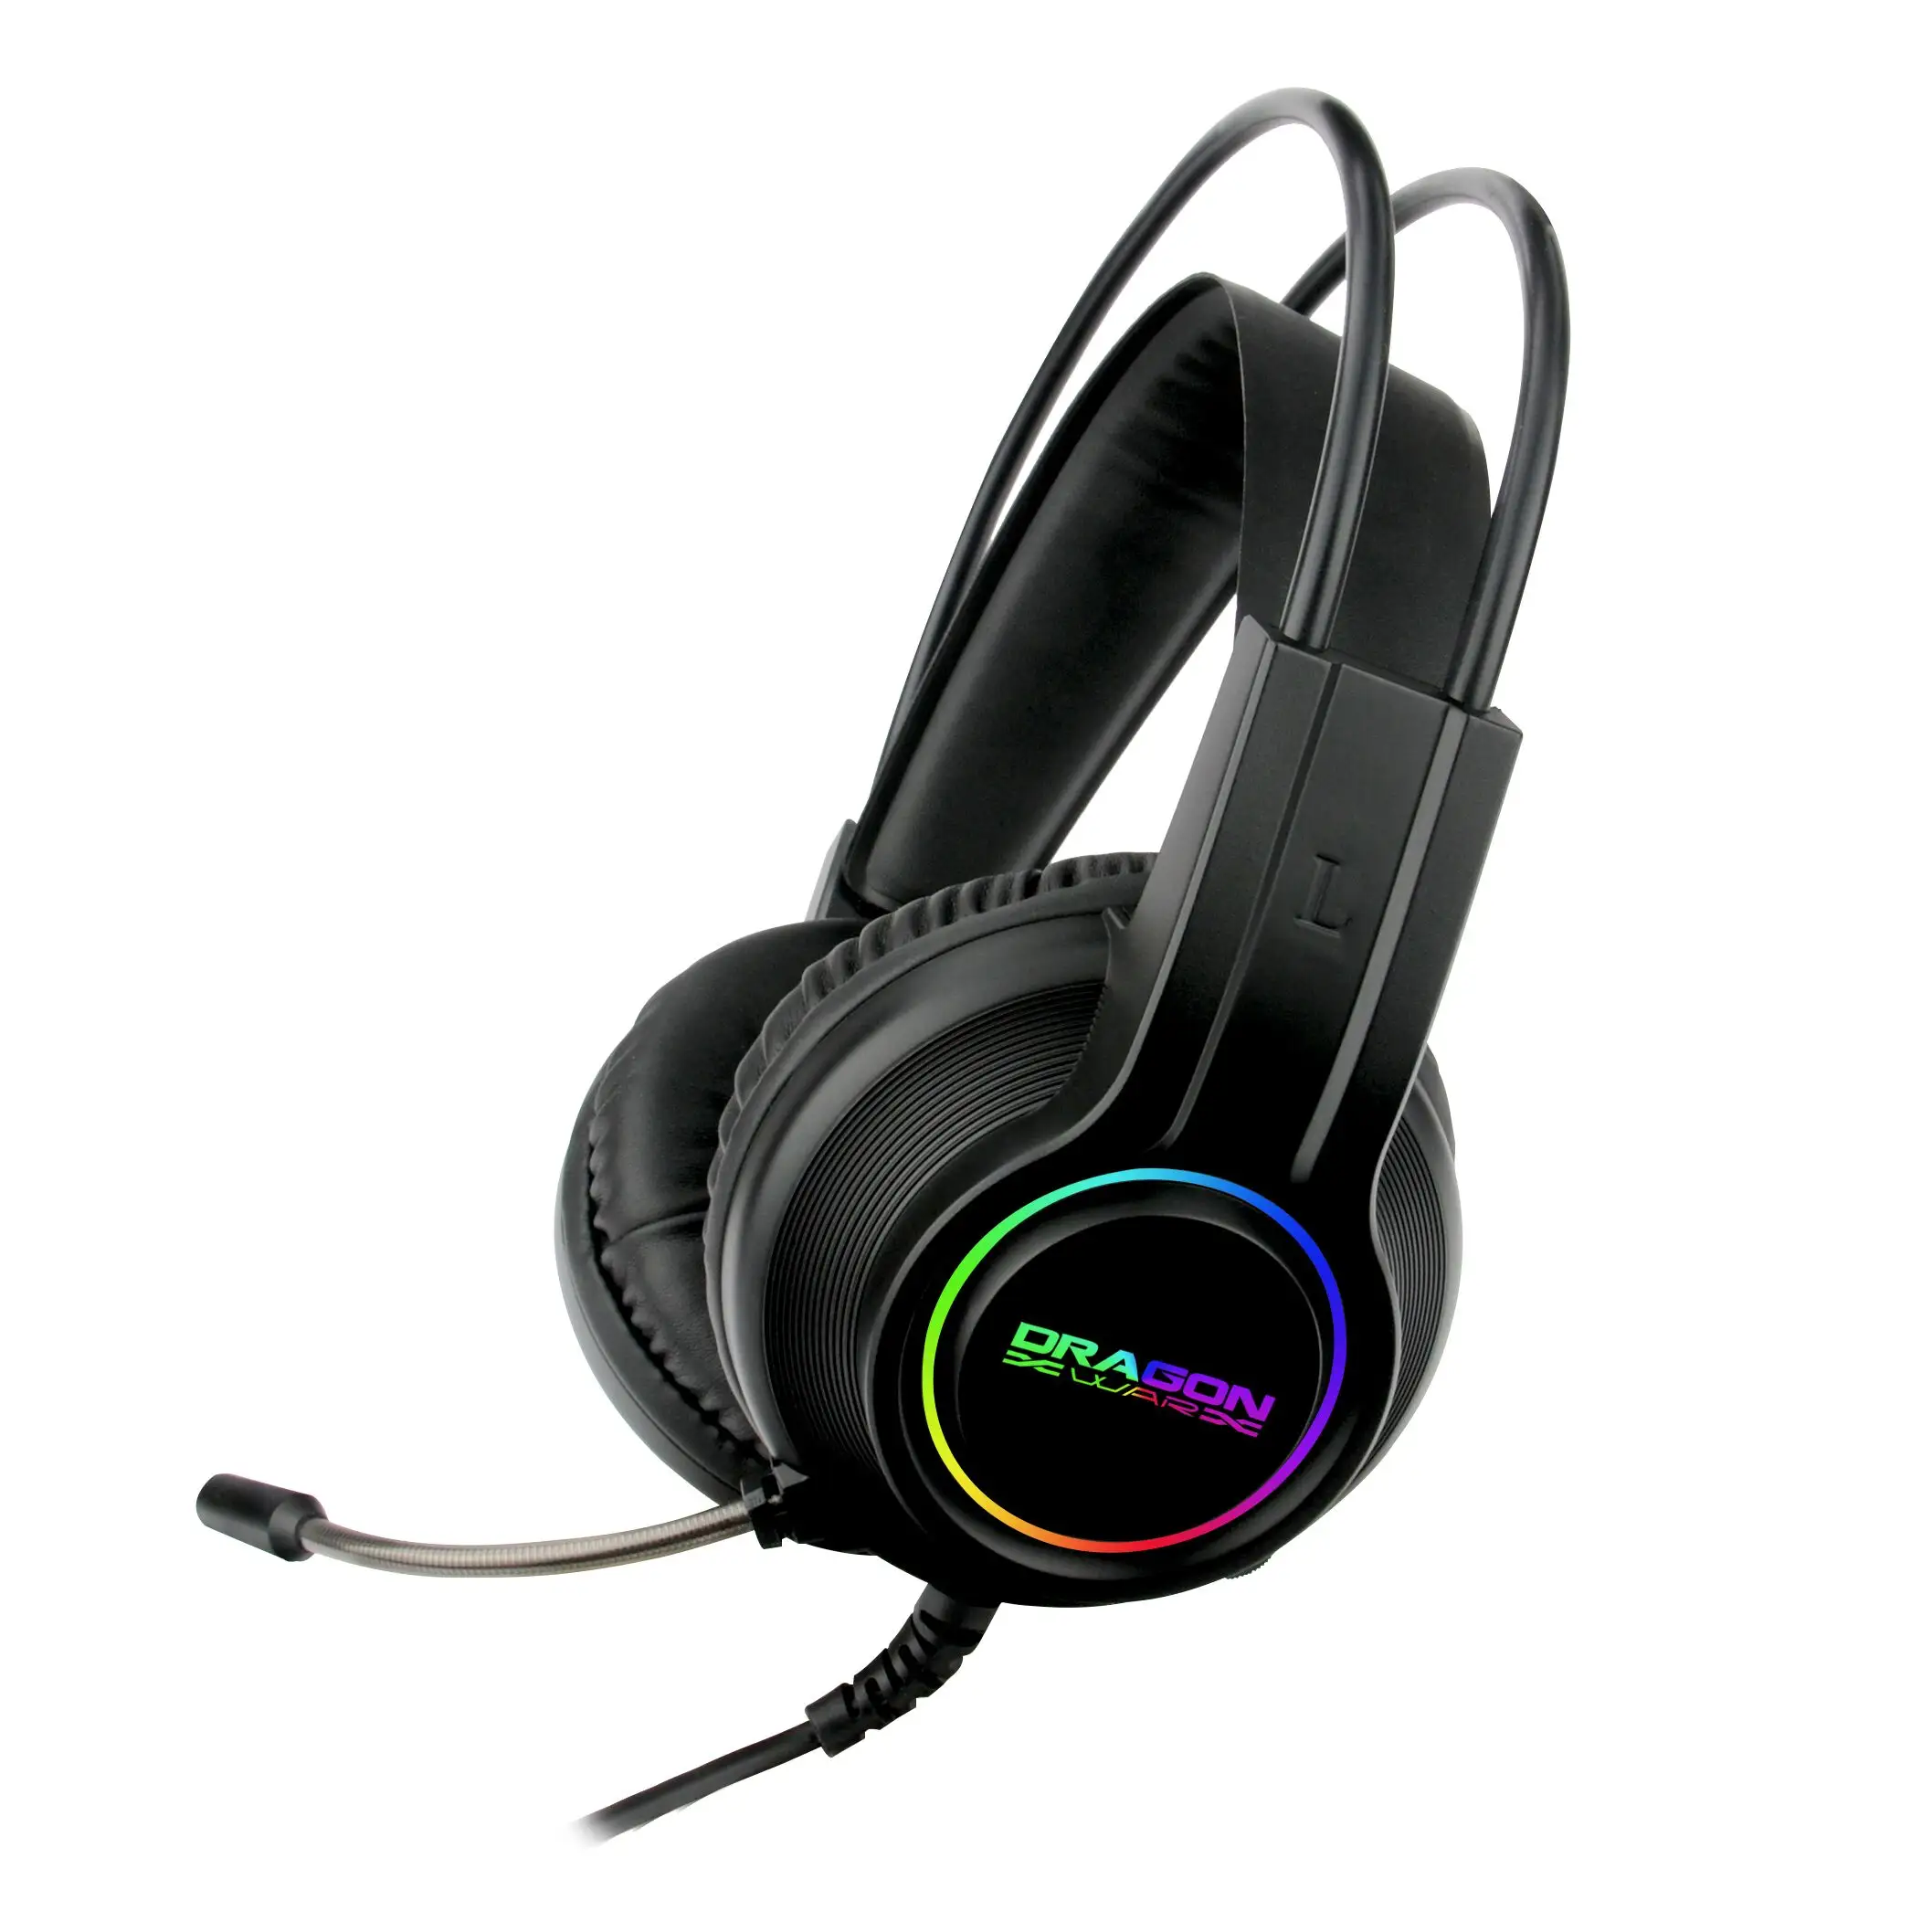 Headsets Noise Canceling High Quality Factory Price Noise Cancelling Gaming Headset RGB 7.1 Channel Stereo Sound Headsets For Sale